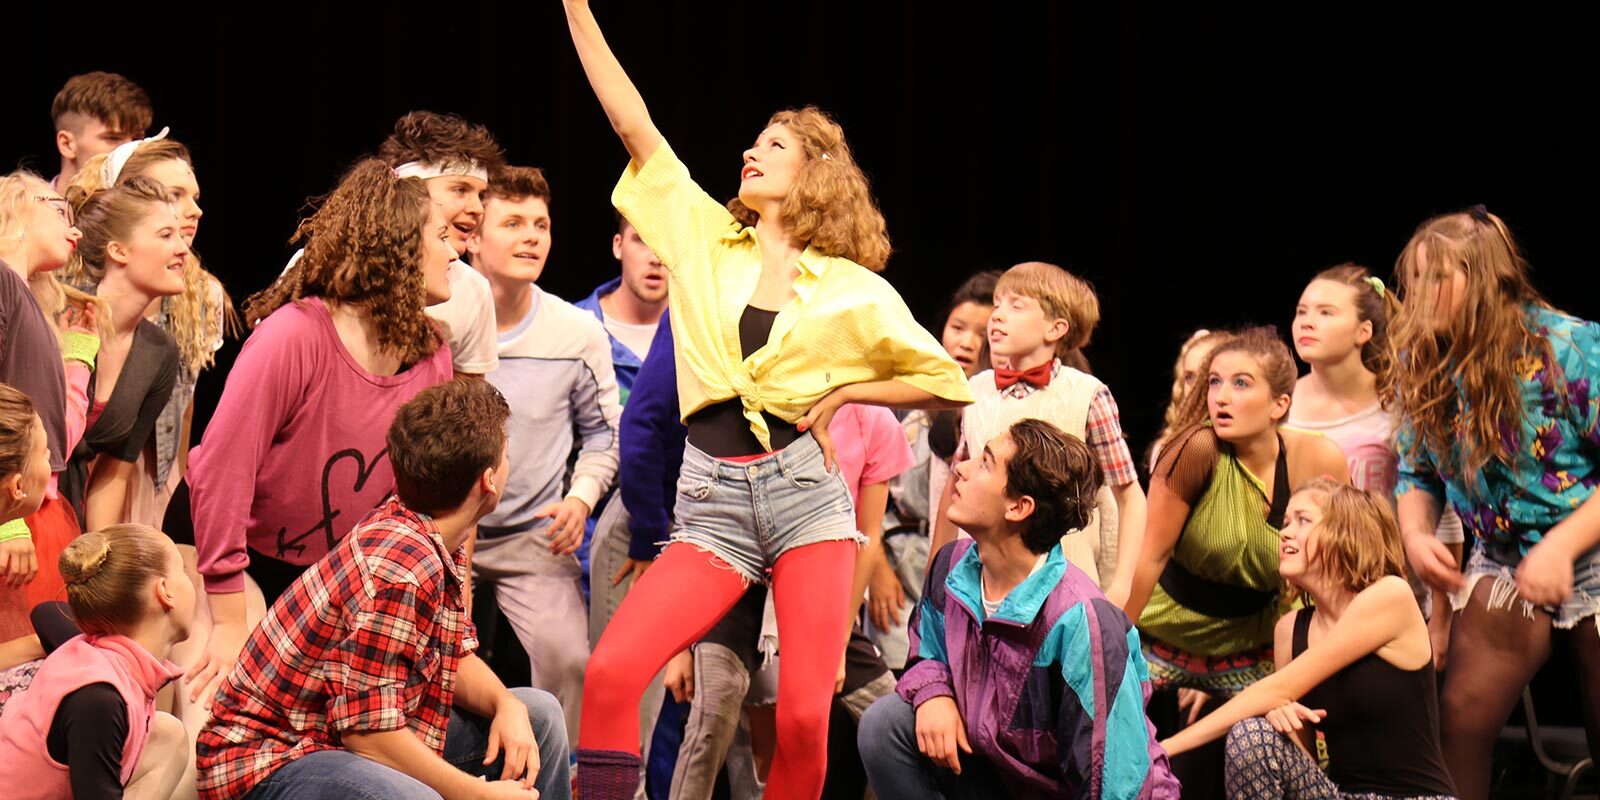 Teens performing in a musical